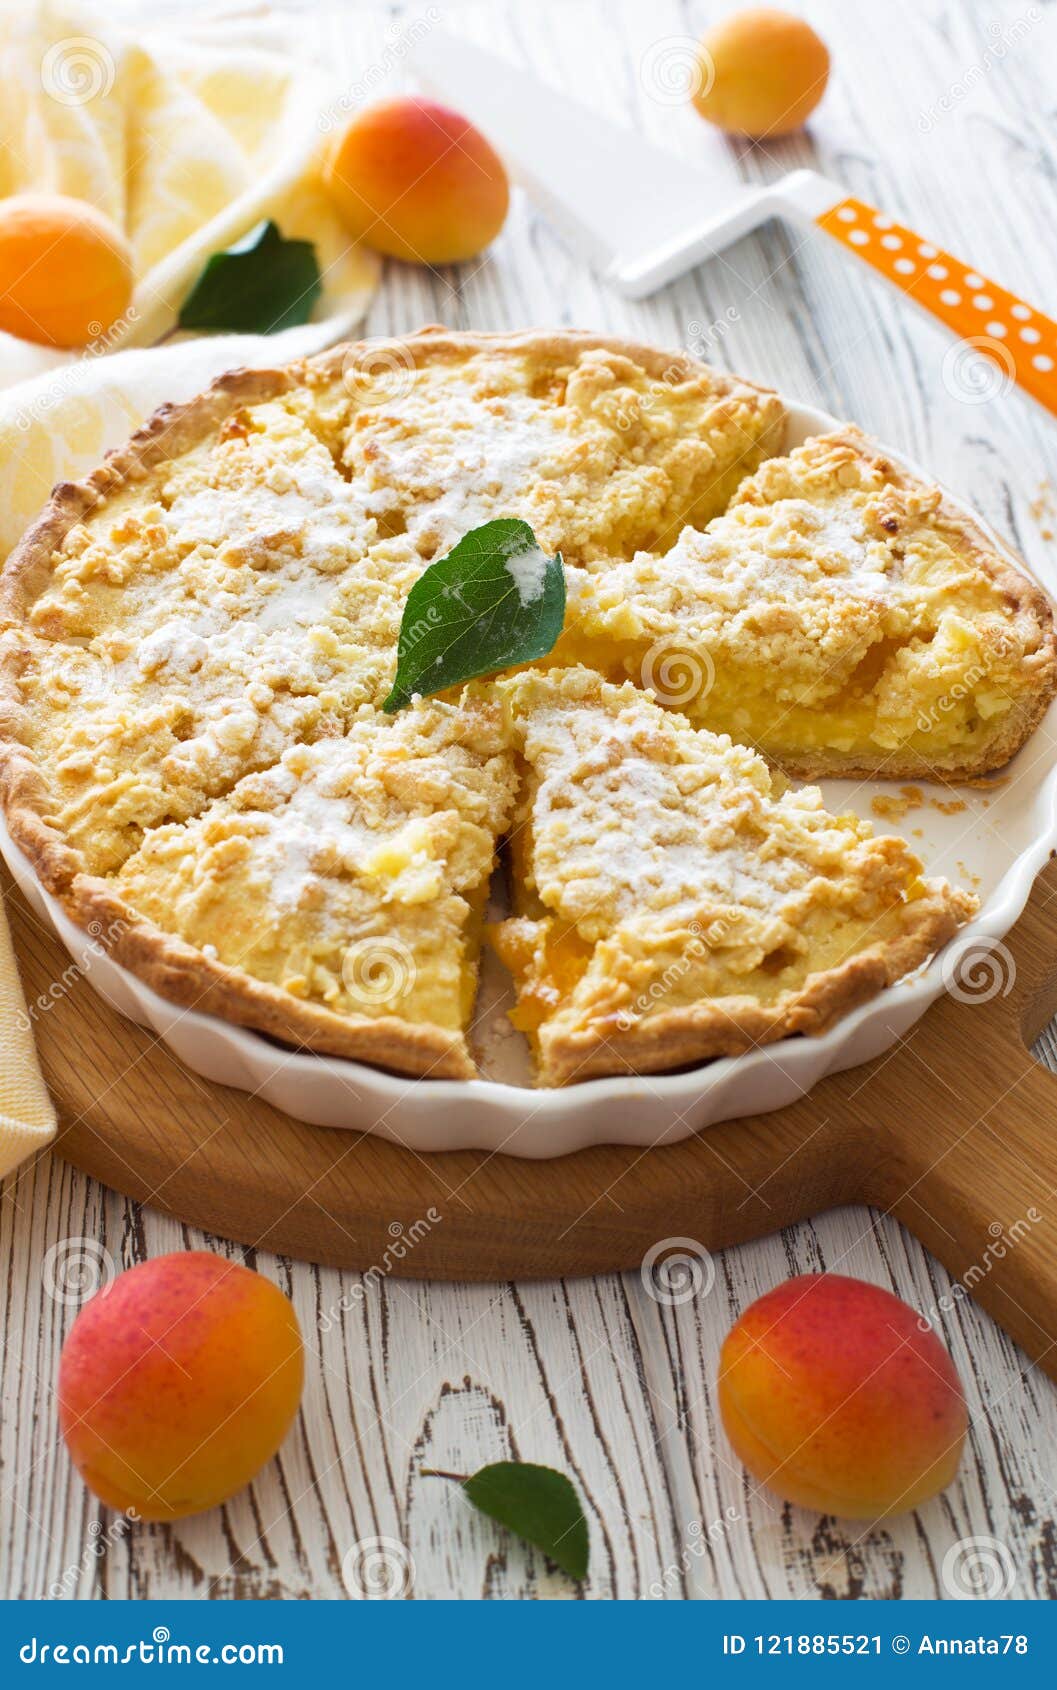 Homemade Apricots And Cottage Cheese Cake Stock Image Image Of